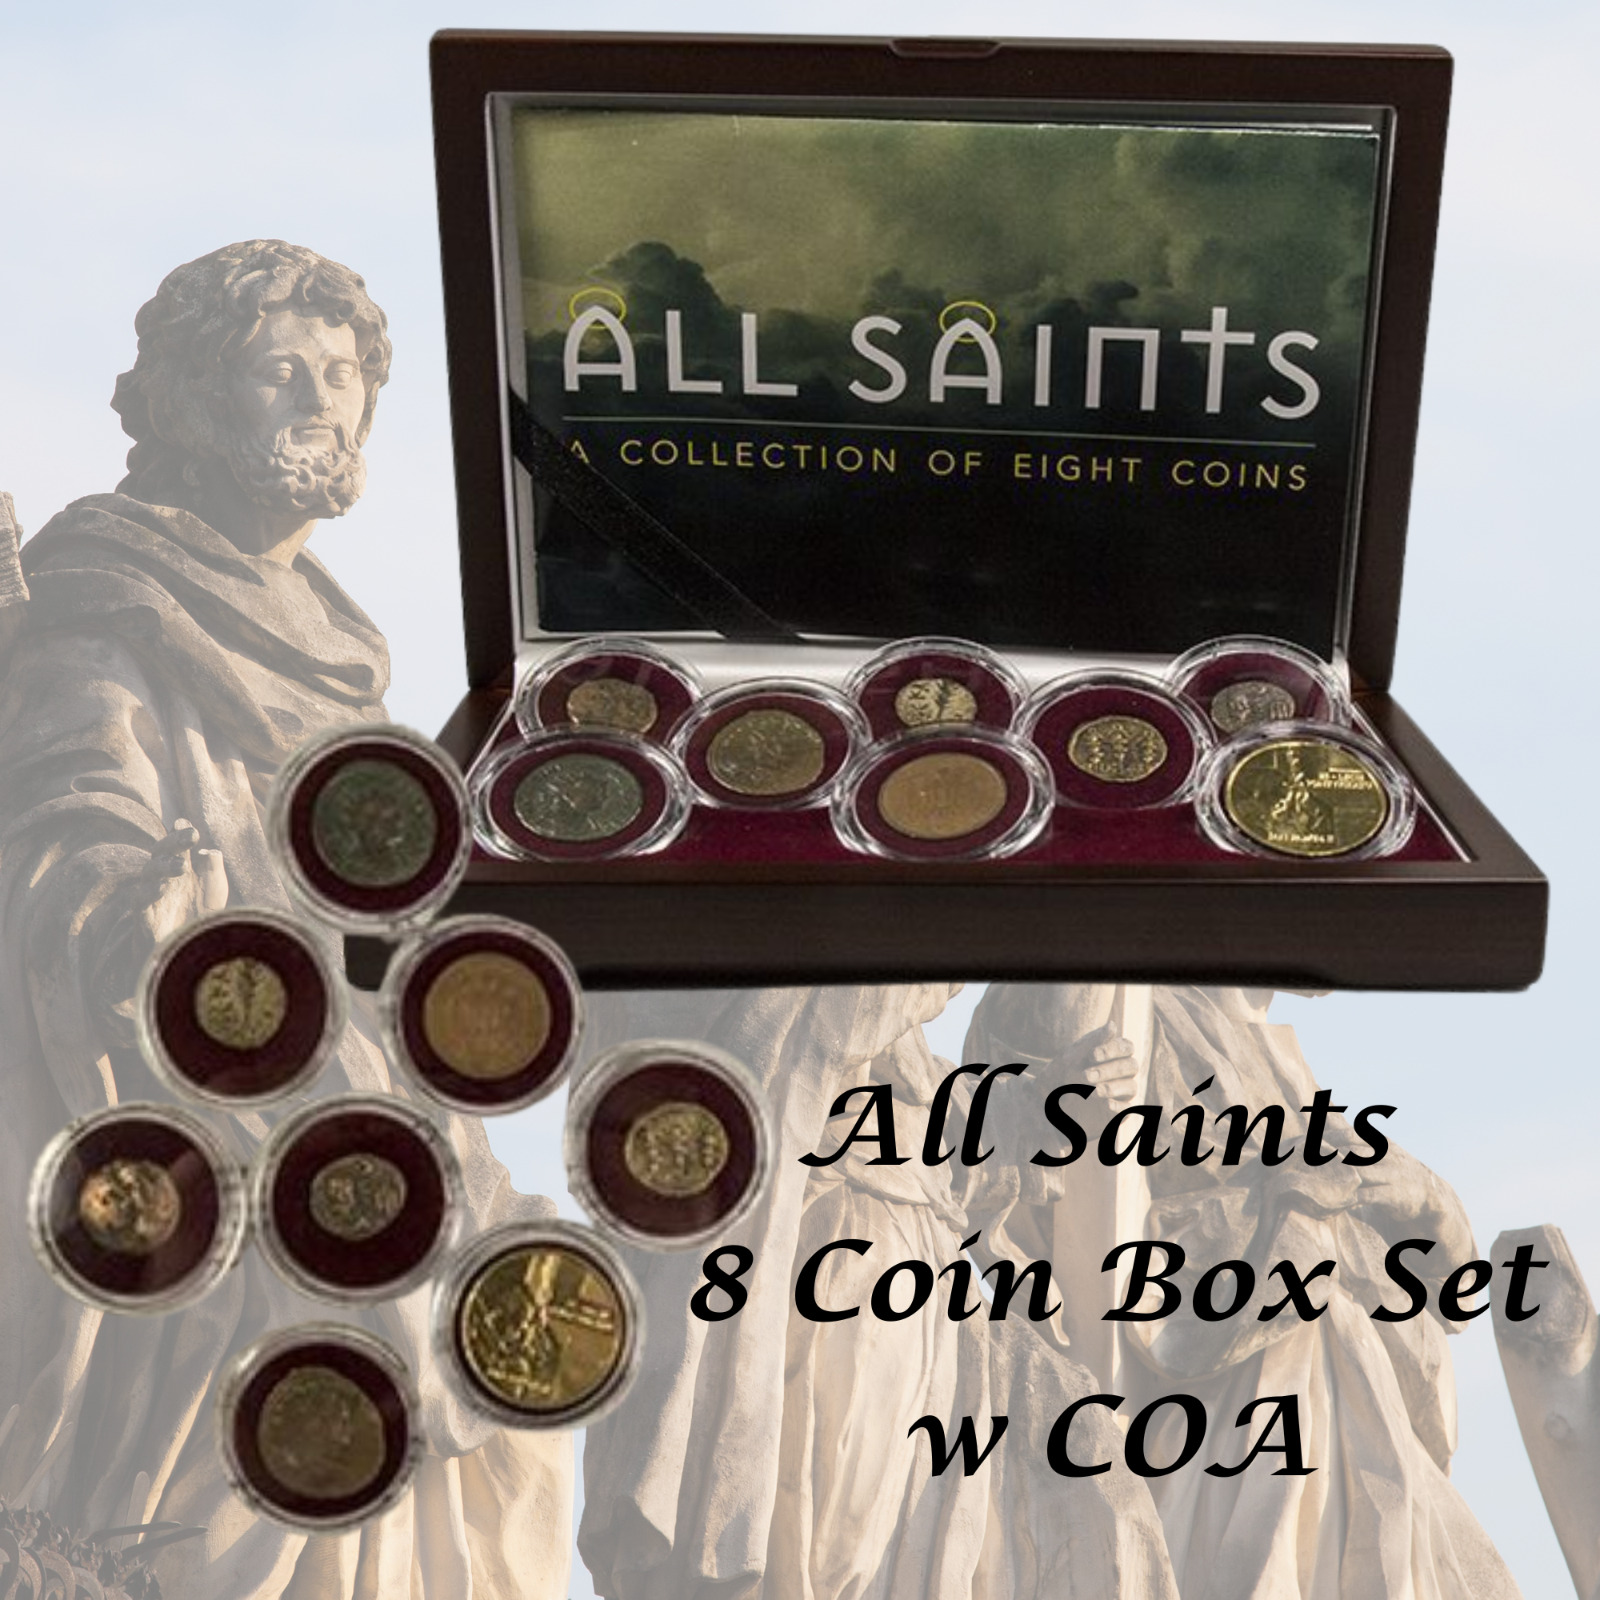 All Saints 8 Coin Deluxe Box Set Paul the Apostle Mother Theresa w COA